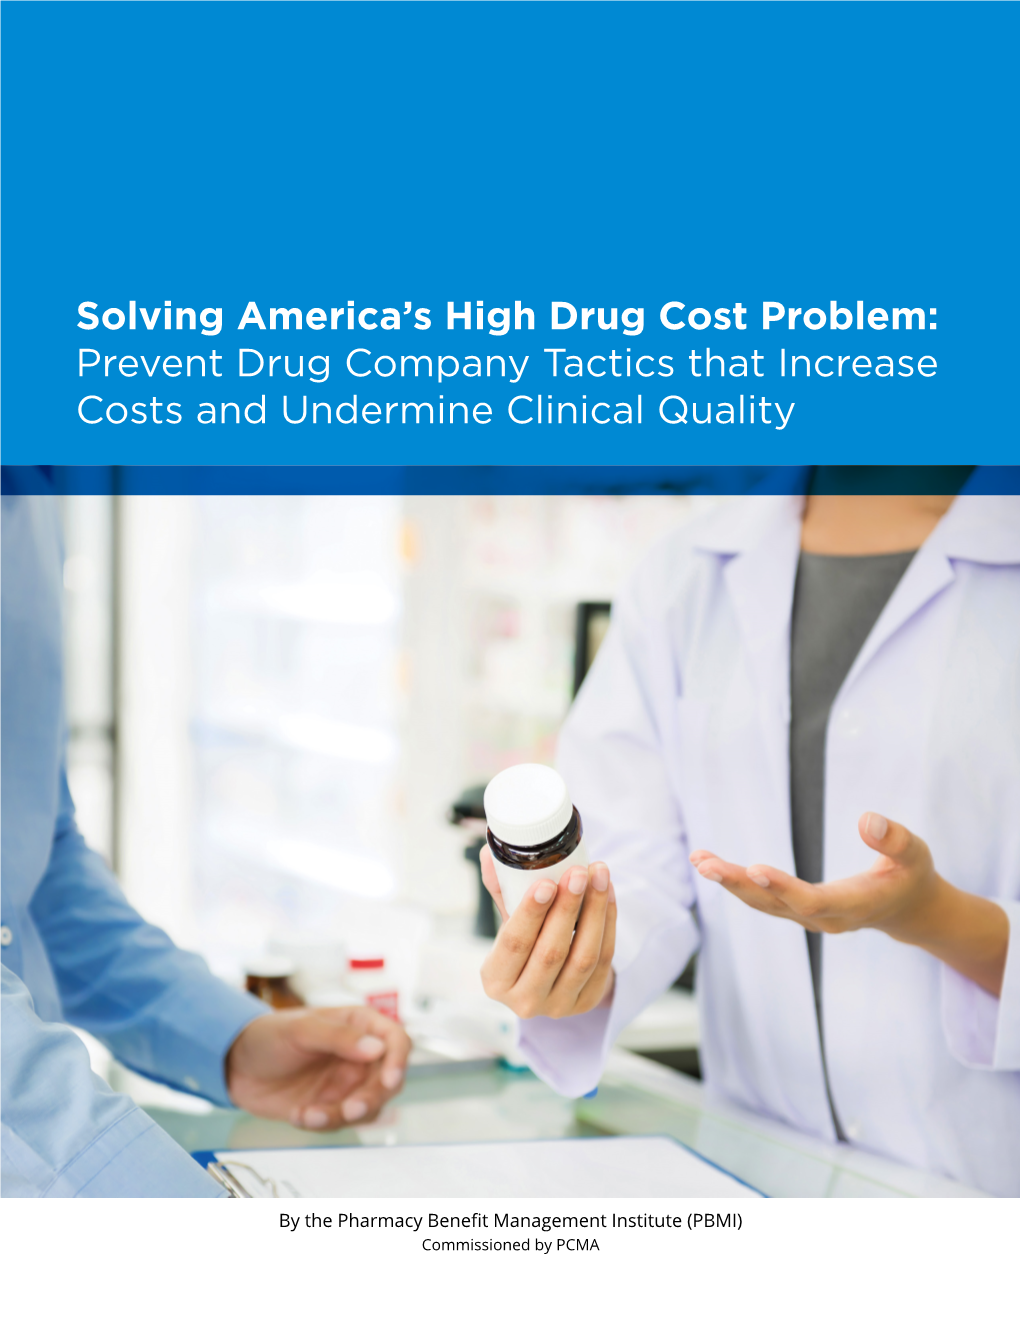 Prevent Drug Company Tactics That Increase Costs and Undermine Clinical Quality